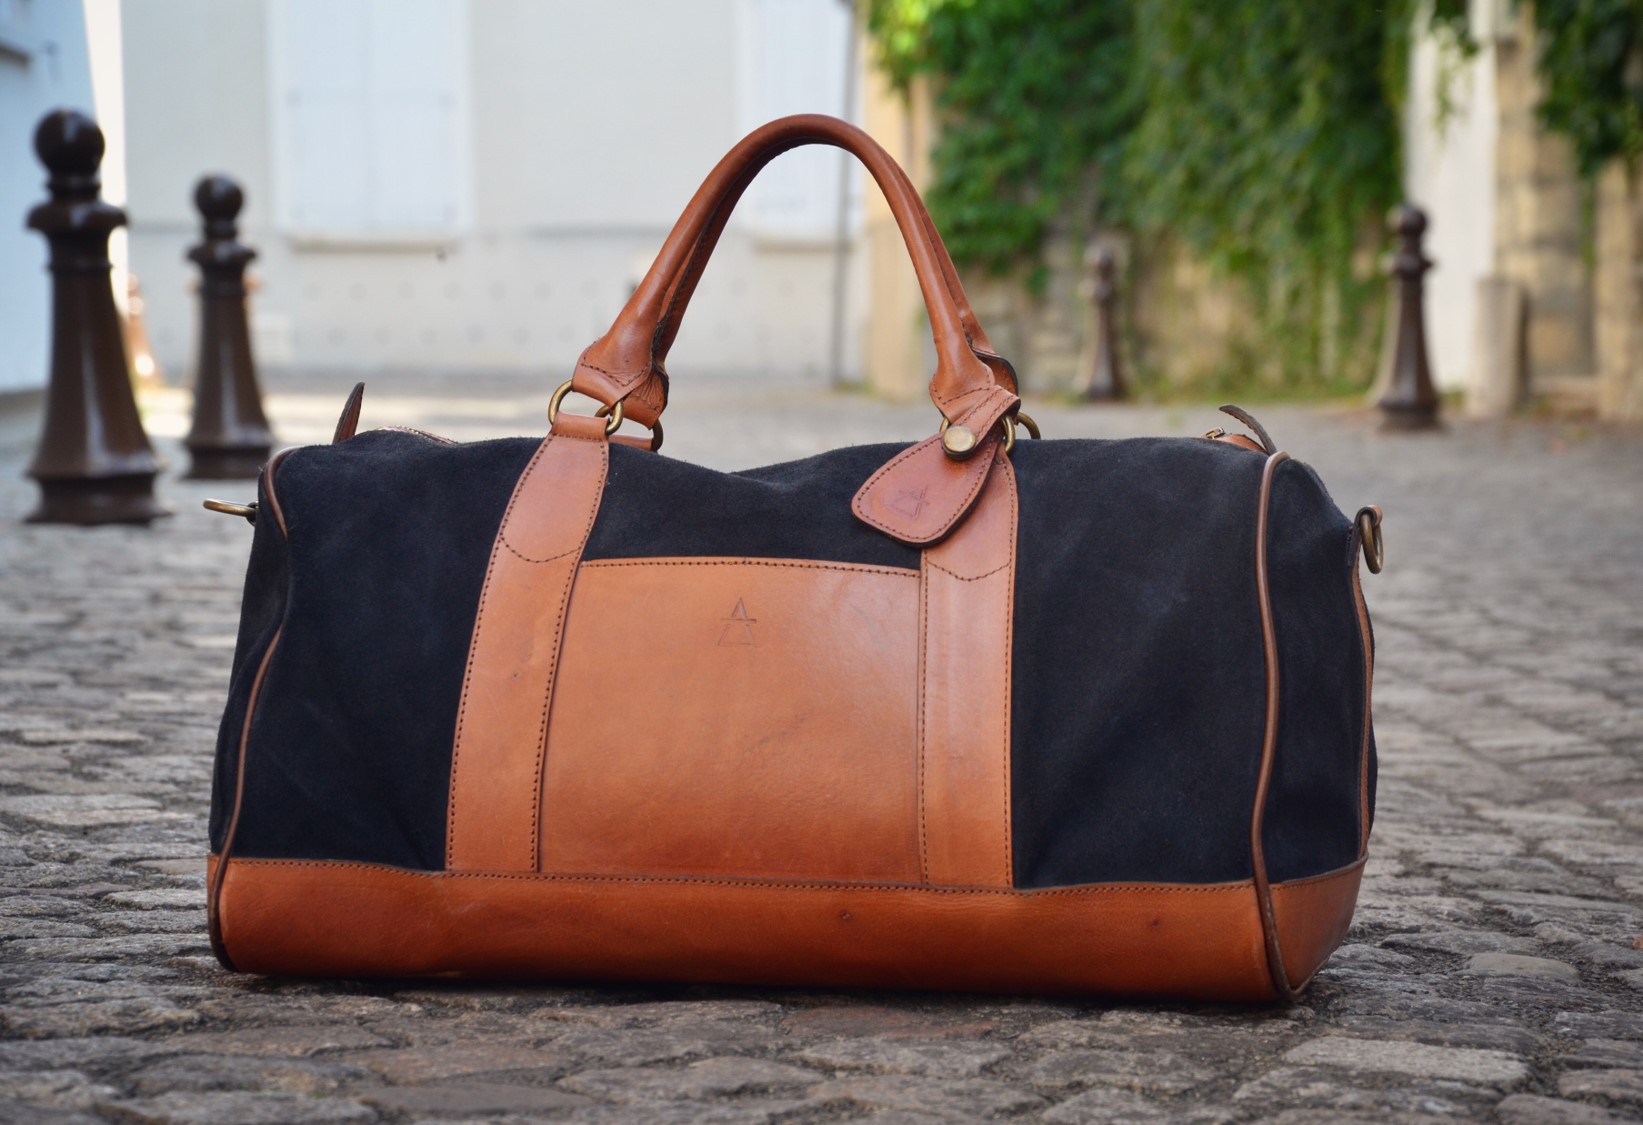 Pachamama - Weekend Bag Diego Blue - Leather travel bag